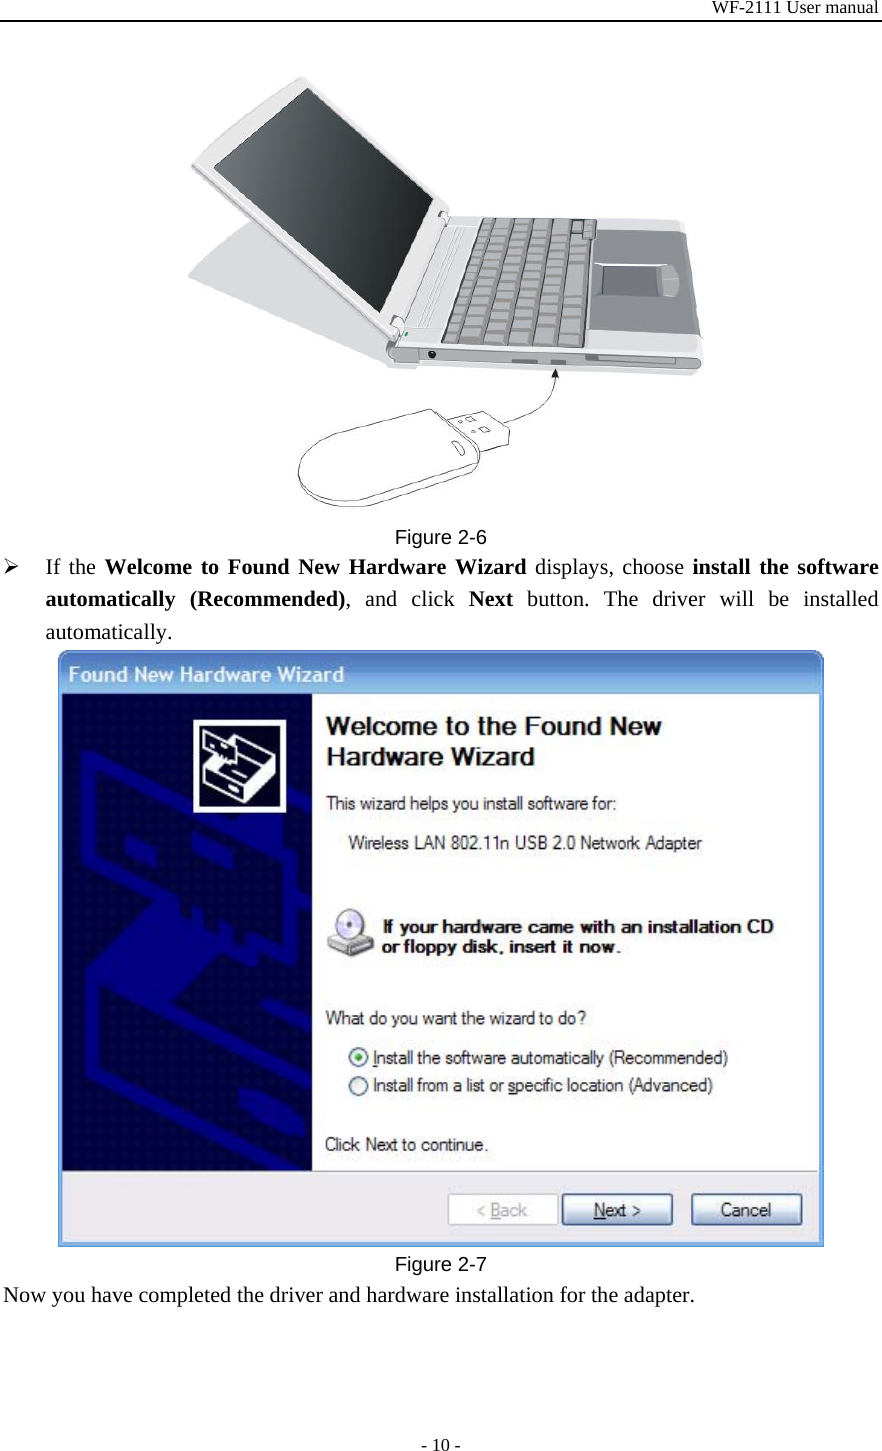 WF-2111 User manual - 10 -  Figure 2-6 ¾ If the Welcome to Found New Hardware Wizard displays, choose install the software automatically (Recommended), and click Next button. The driver will be installed automatically.  Figure 2-7 Now you have completed the driver and hardware installation for the adapter. 